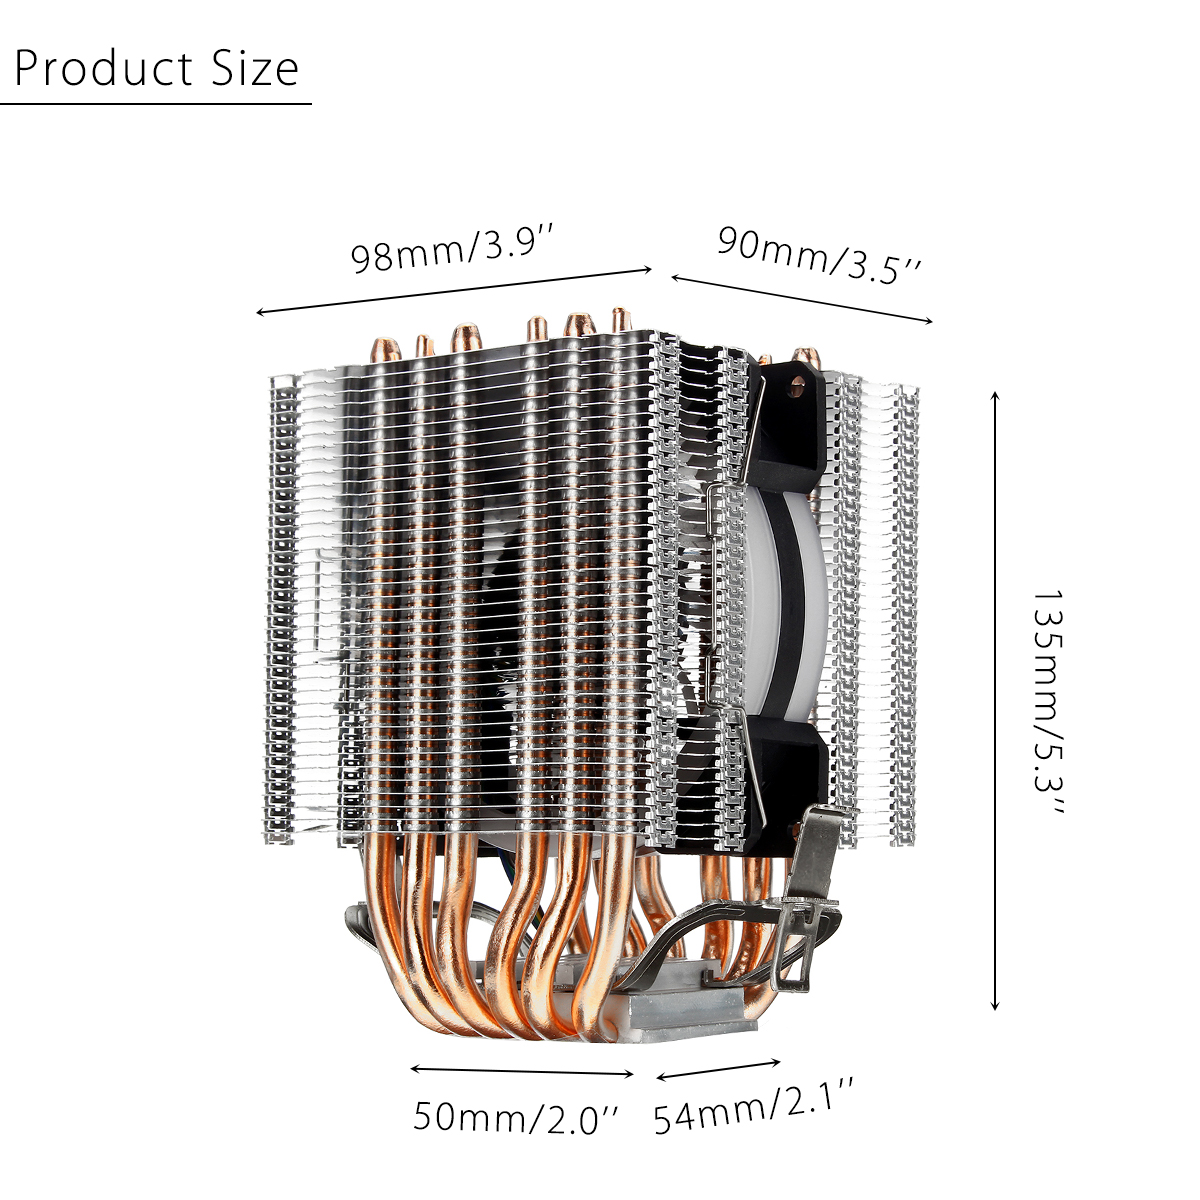 3 Pin CPU Cooler Cooling Fan Heatsink for Intel 775/1150/1151/1155/1156/1366 and AMD All Platforms 5 Colors Lighting 17